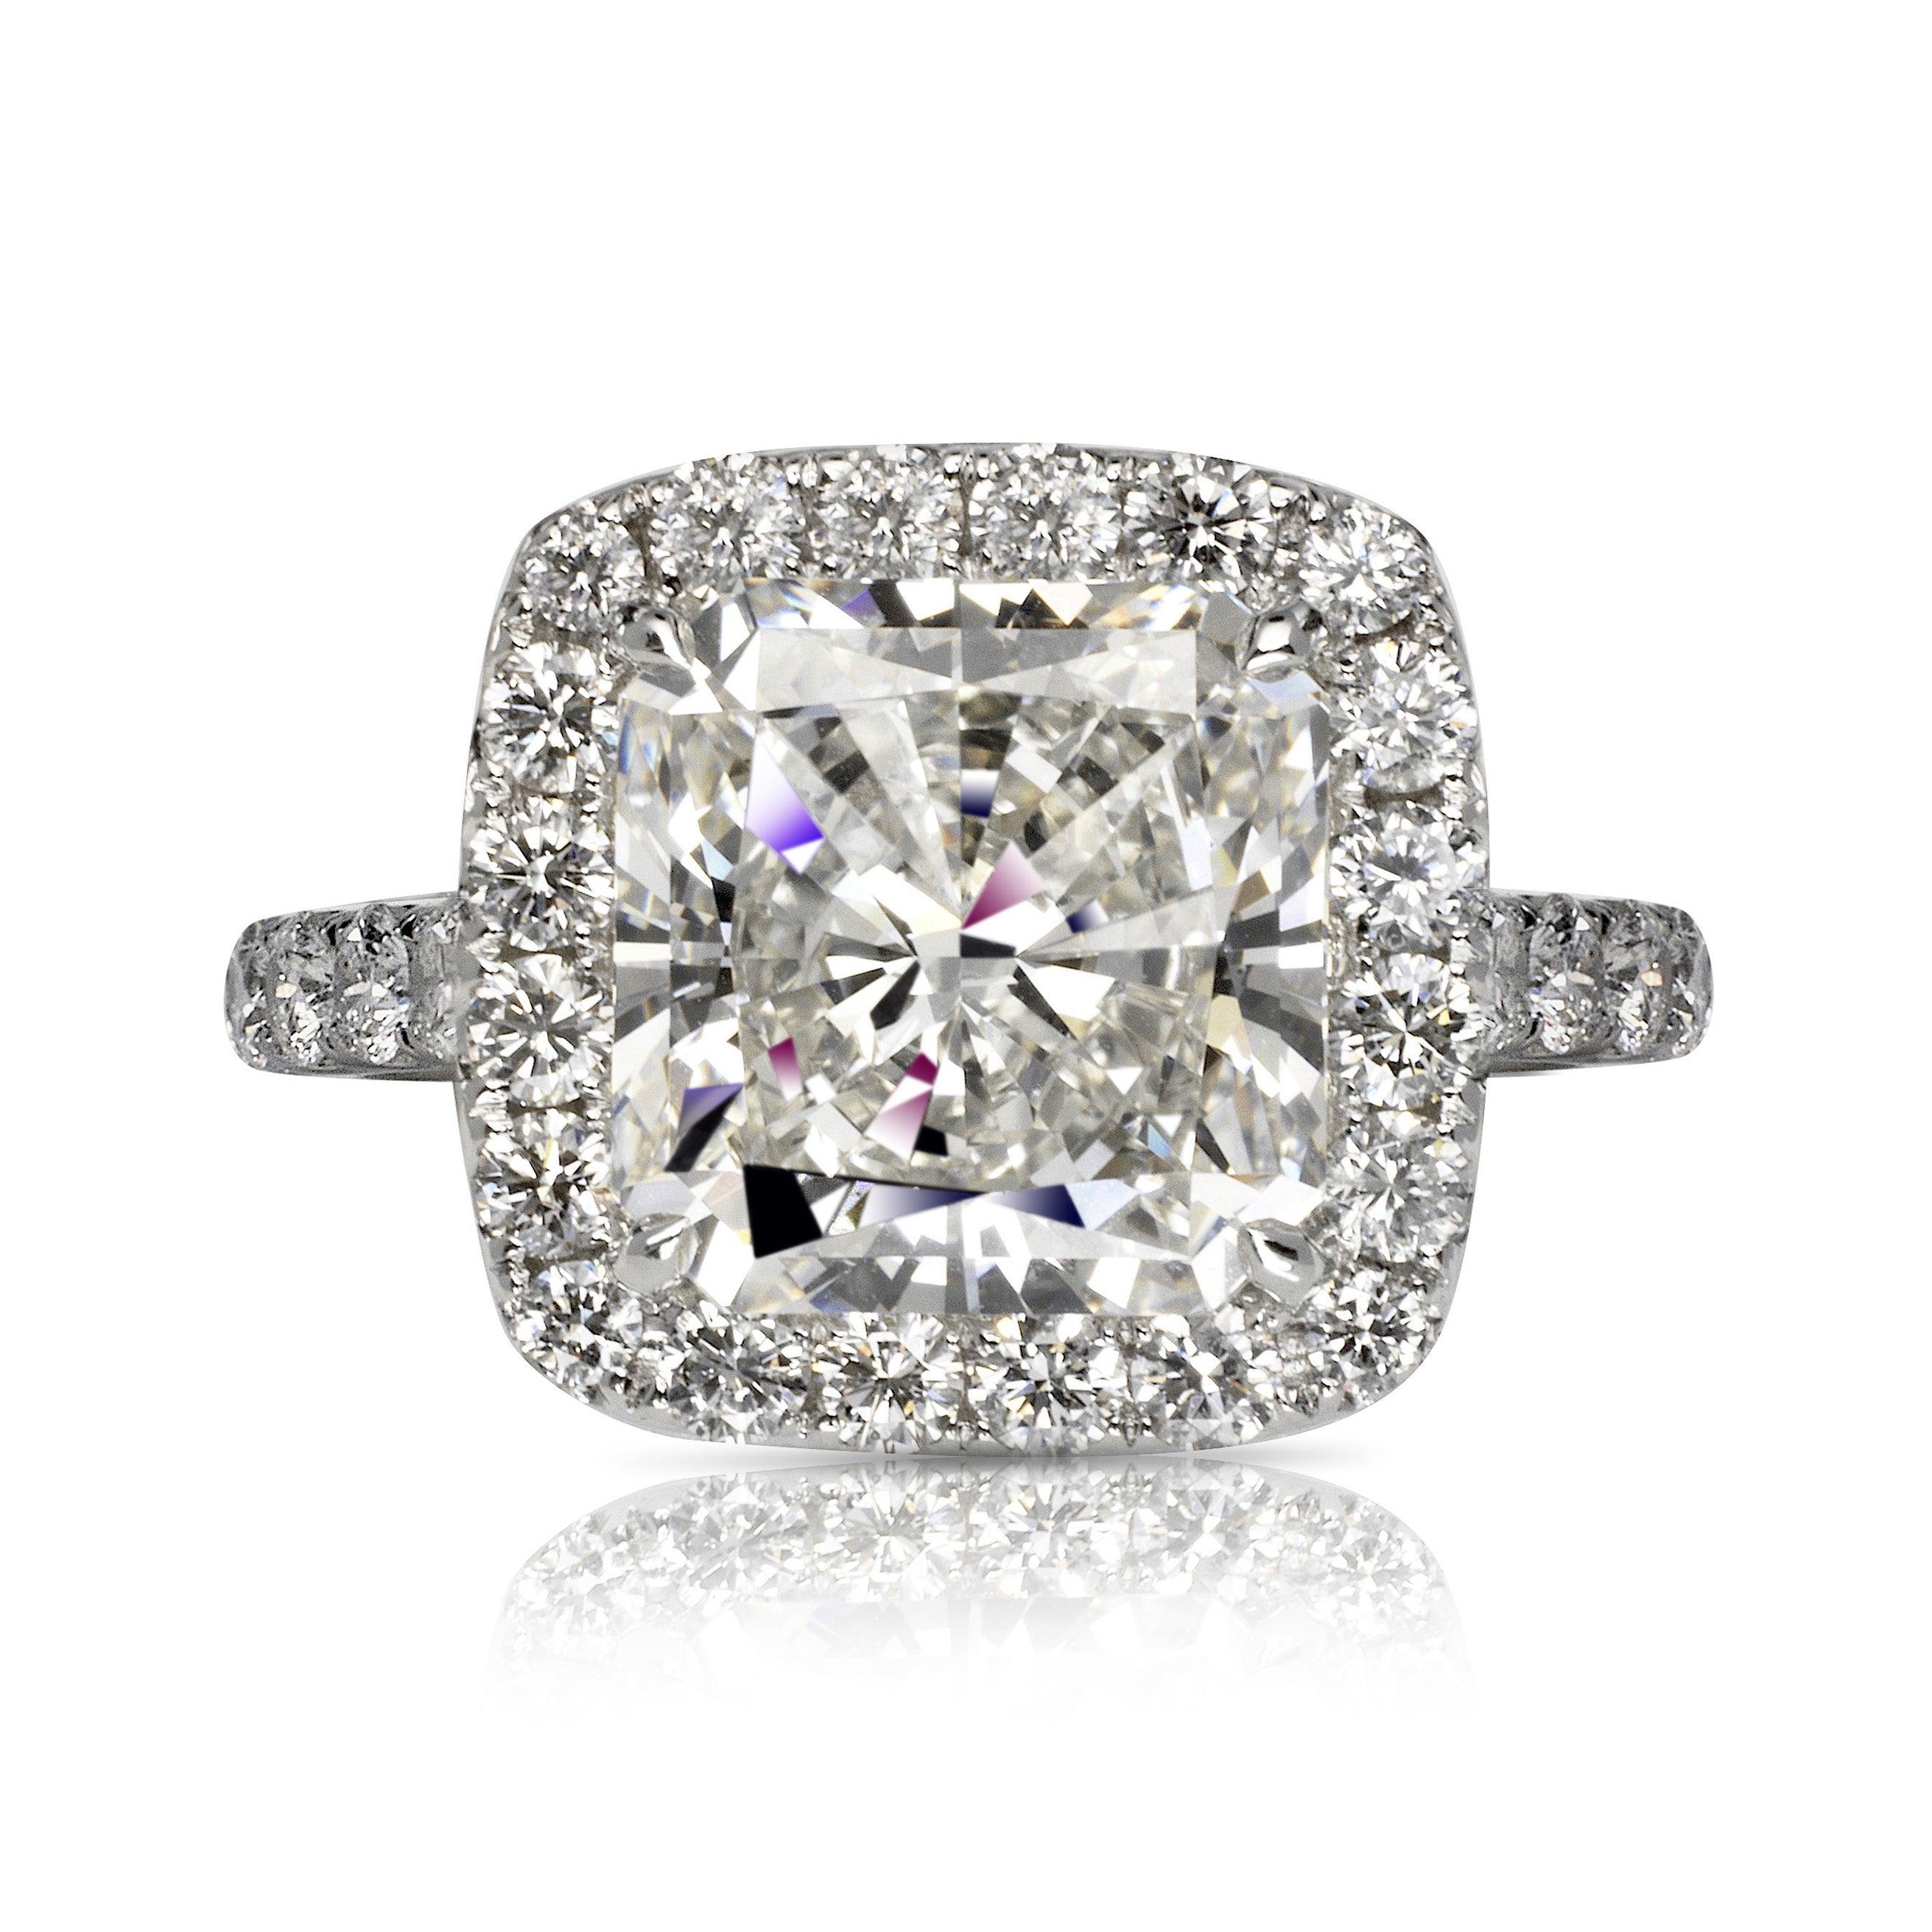 THARA RADIANT CUT DIAMOND ENGAGEMENT RING in 18K WHITE GOLD BY MIKE NEKTA
GIA CERTIFIED

Center Diamond:
Carat Weight: 5.20 Carats
Color : I
Clarity: VVS1
Style: RADIANT CUT / CUT-CORNERED SQUARE MODIFIED BRILLIANT 
Measurements: 10.03 x 9.73 x 6.18